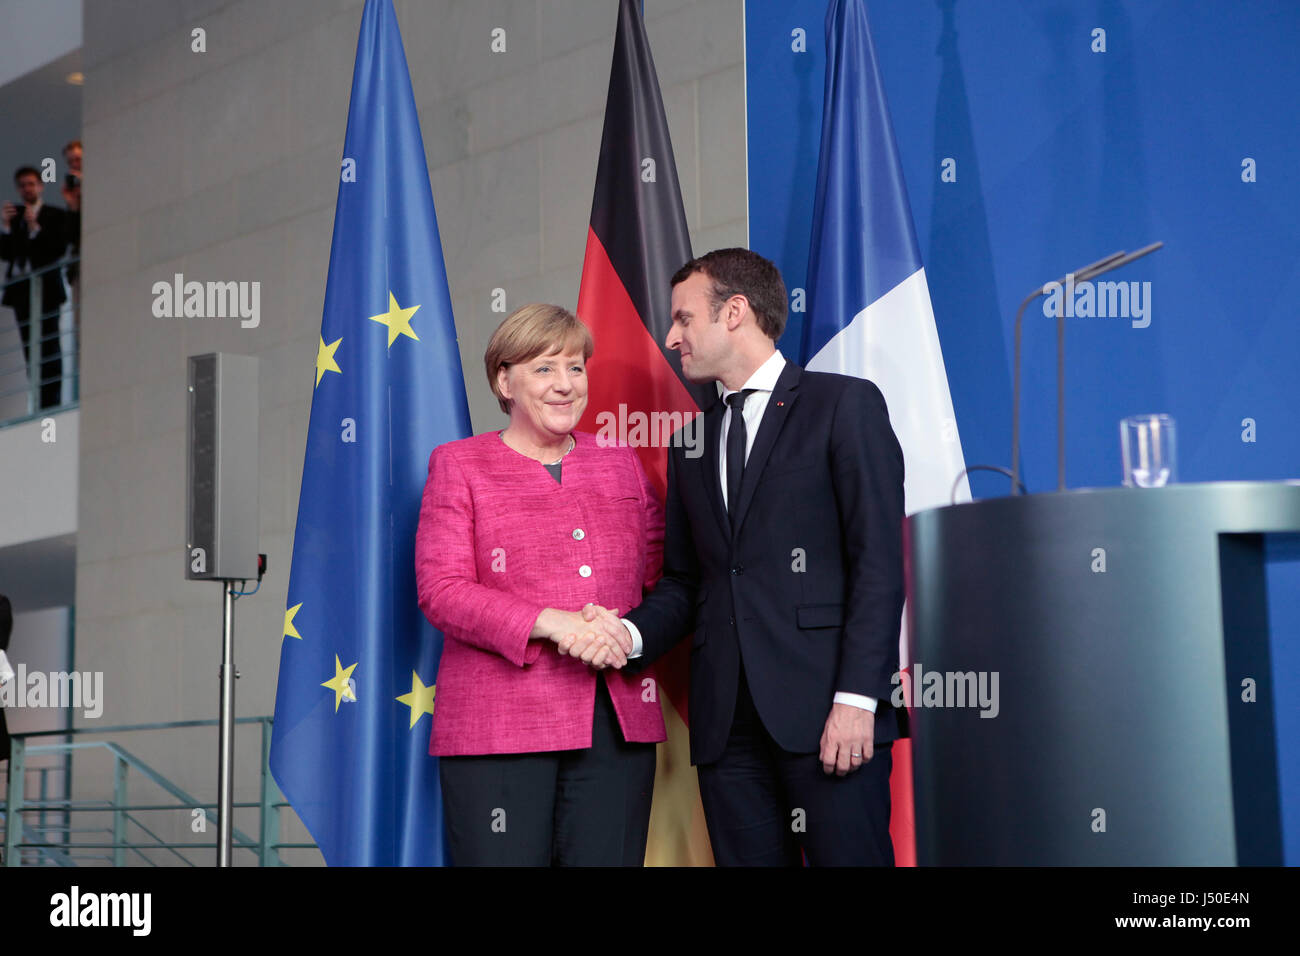 Simon Becker / Le Pictorium -  Emmanuel Macron meets Angela Merkel in Berlin -  15/05/2017  -  Germany / Berlin / Berlin  -  The new President of the French Republic Emmanuel Macron came to meet Angela Merkel, the German Chancellor for his first international visit. Stock Photo